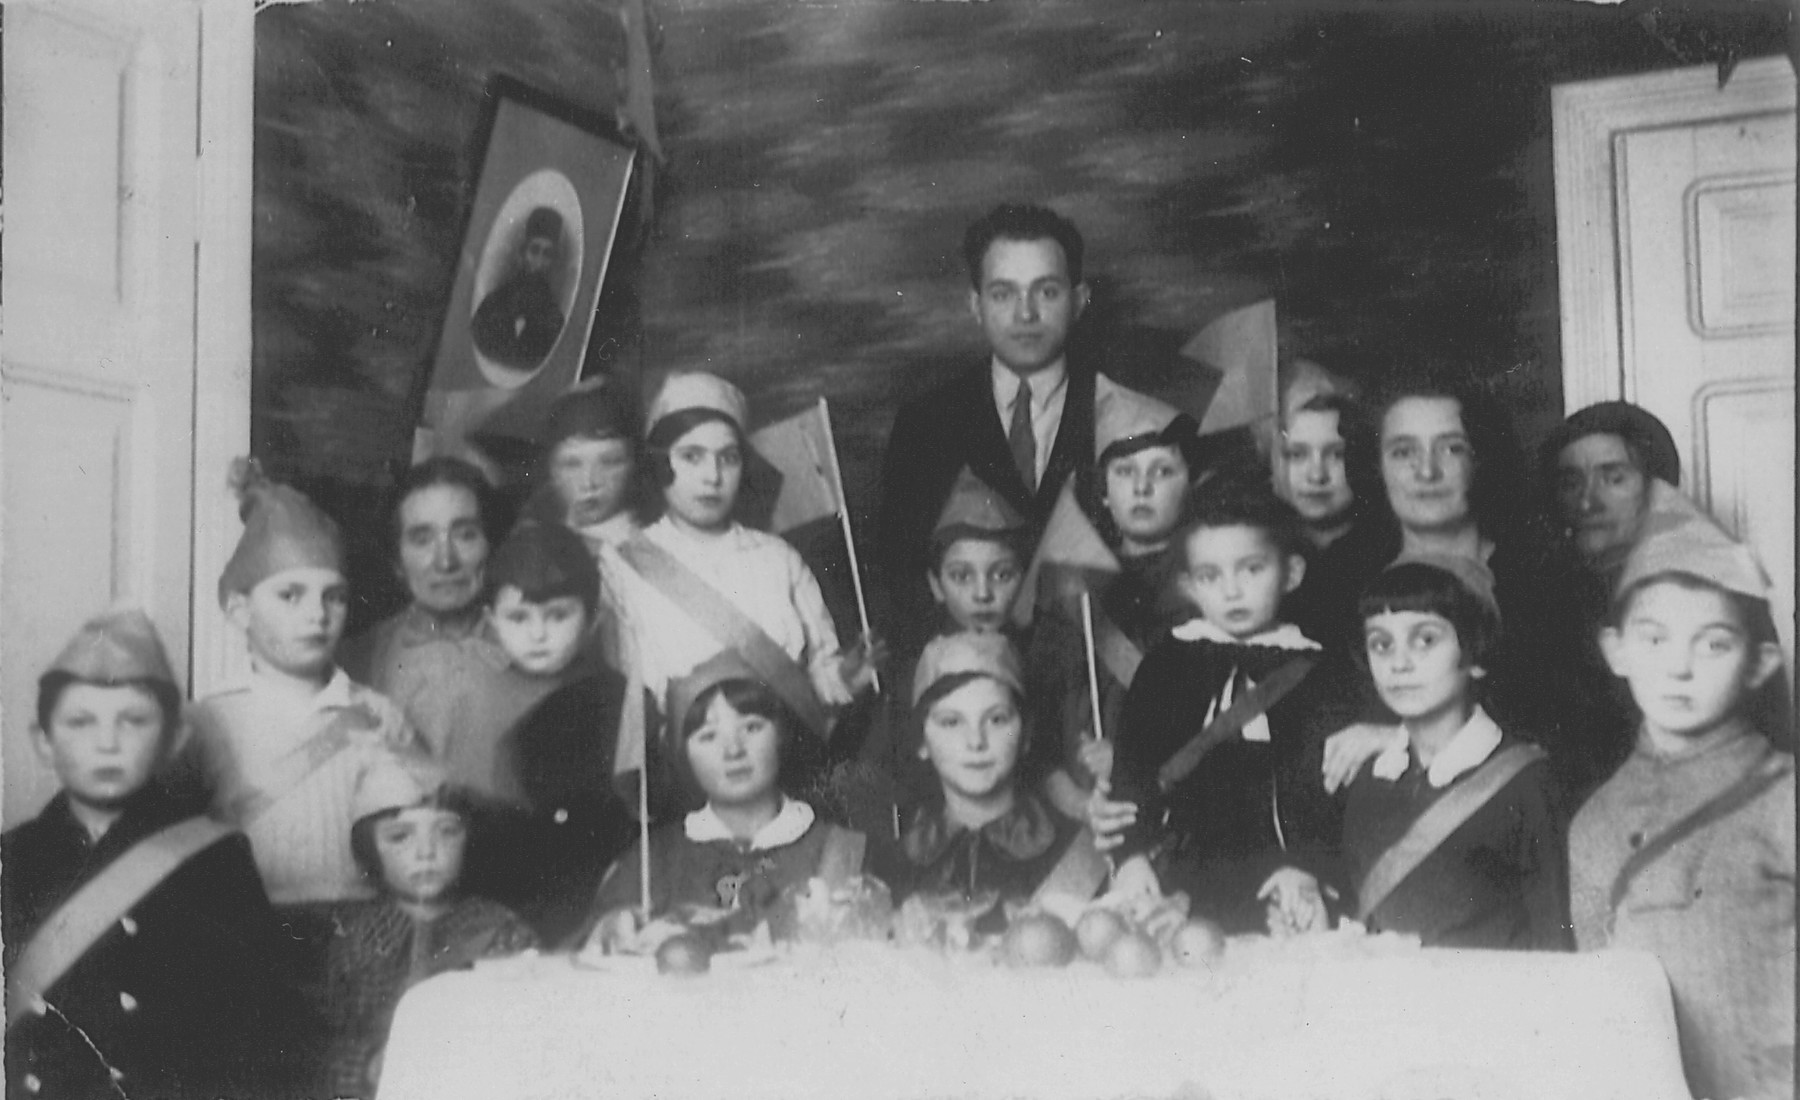 Lejb Melamdowicz's third birthday, Bialystok, 1935. 

Melamed's father (center), grandmother and mother (far left and far right, respectively) join a group of children in hats and sashes around a table adorned with fruit.